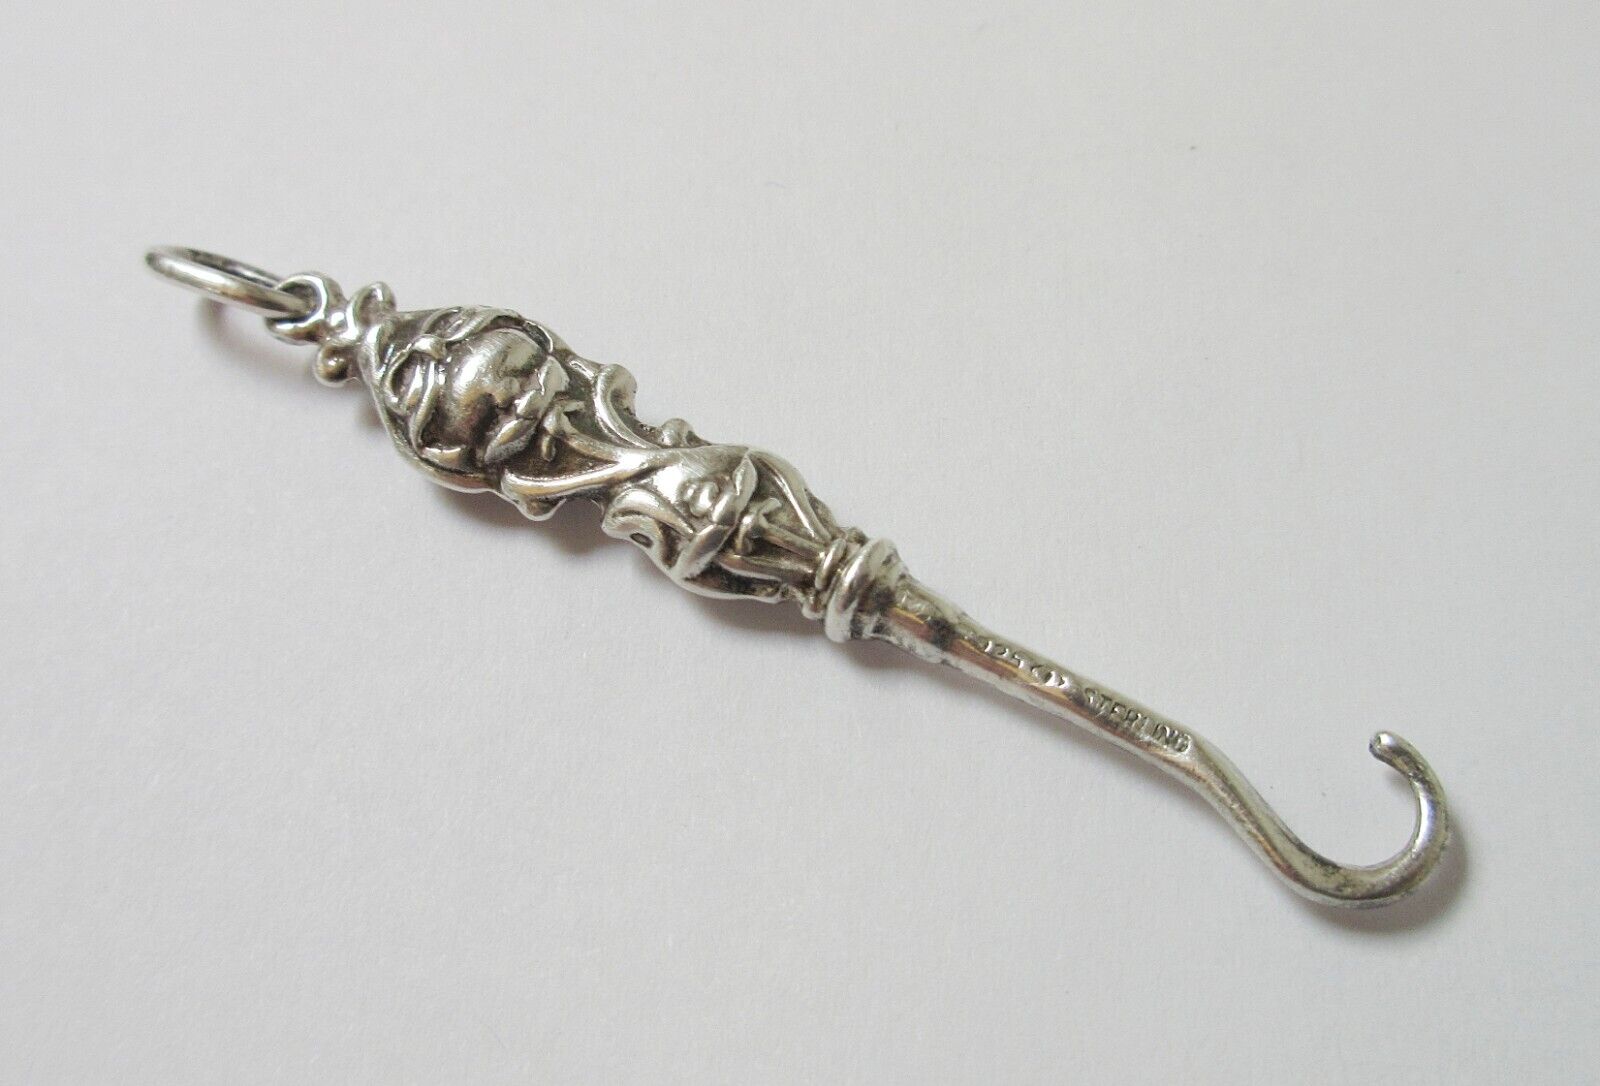 Antique Sterling Silver Repousse Glove Hook Chatelaine Ref. A51